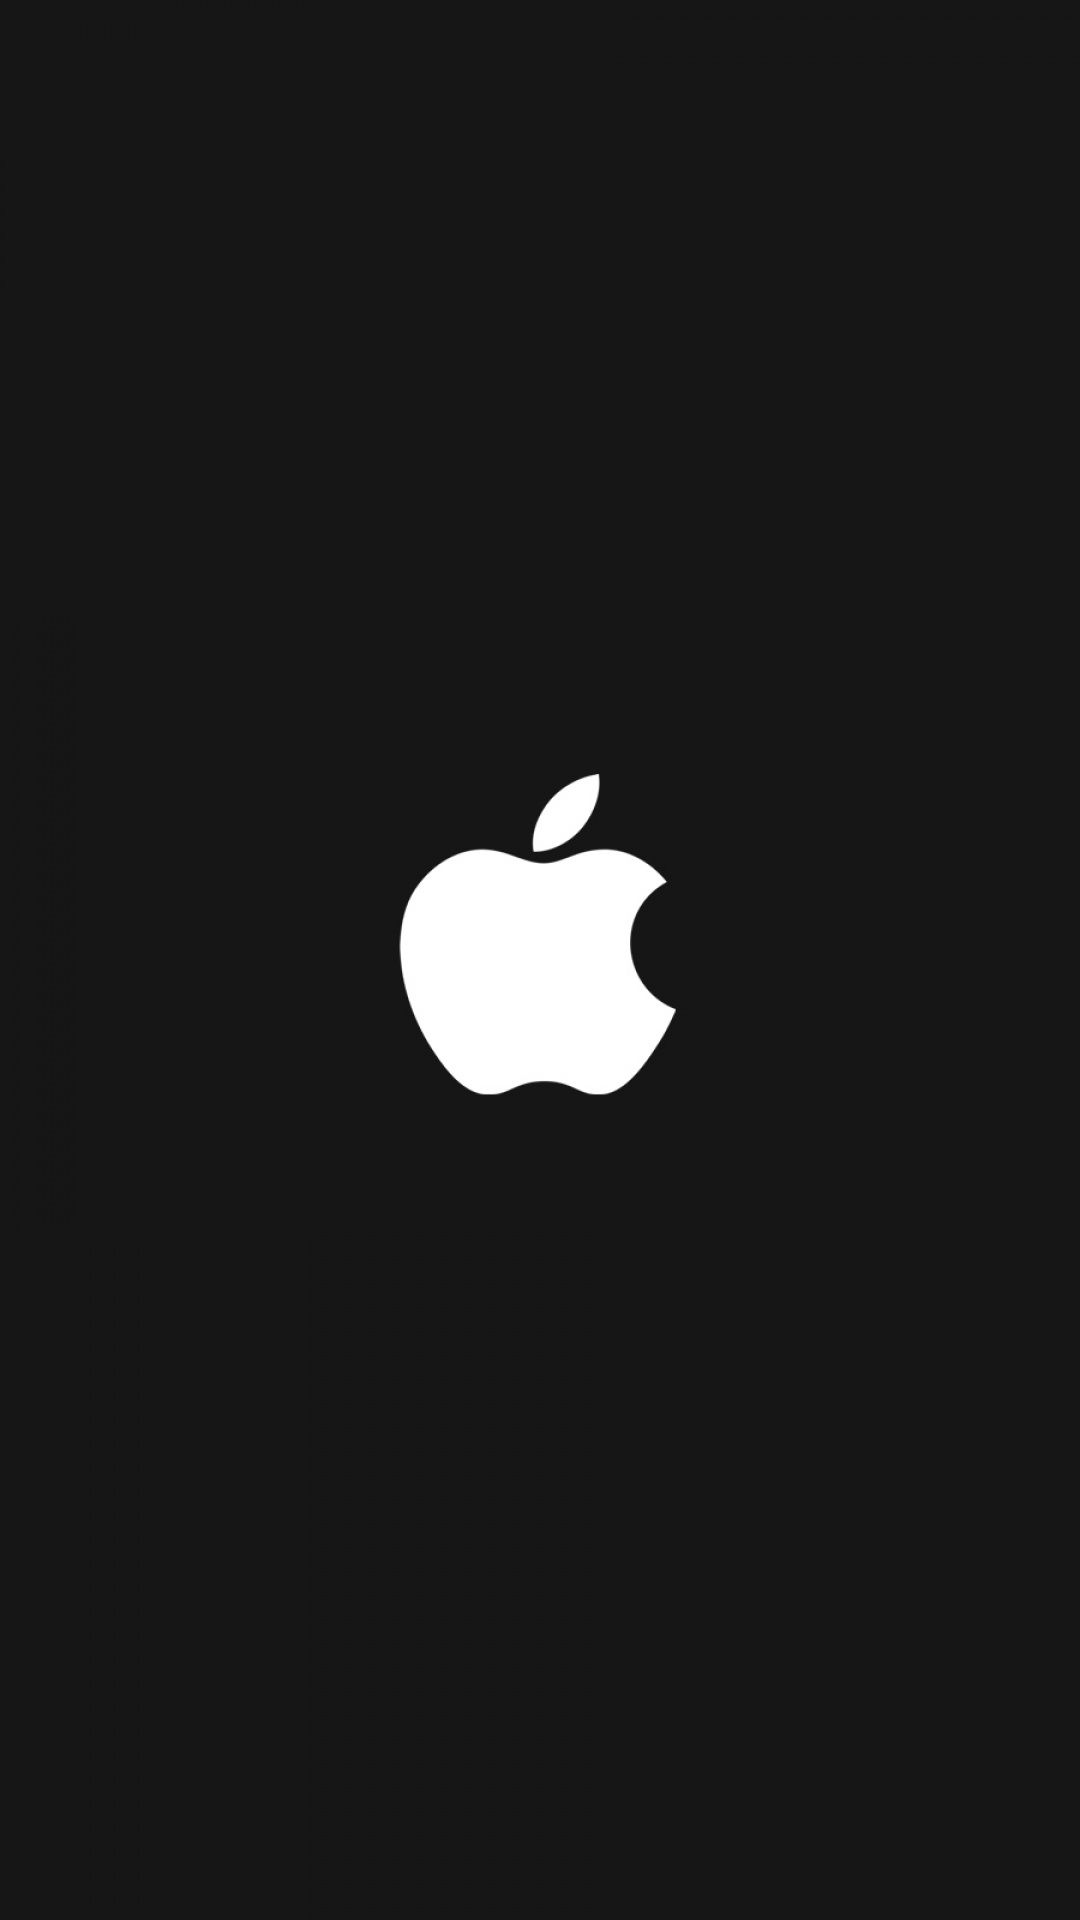 Apple Logo Black And White iPhone Wallpaper